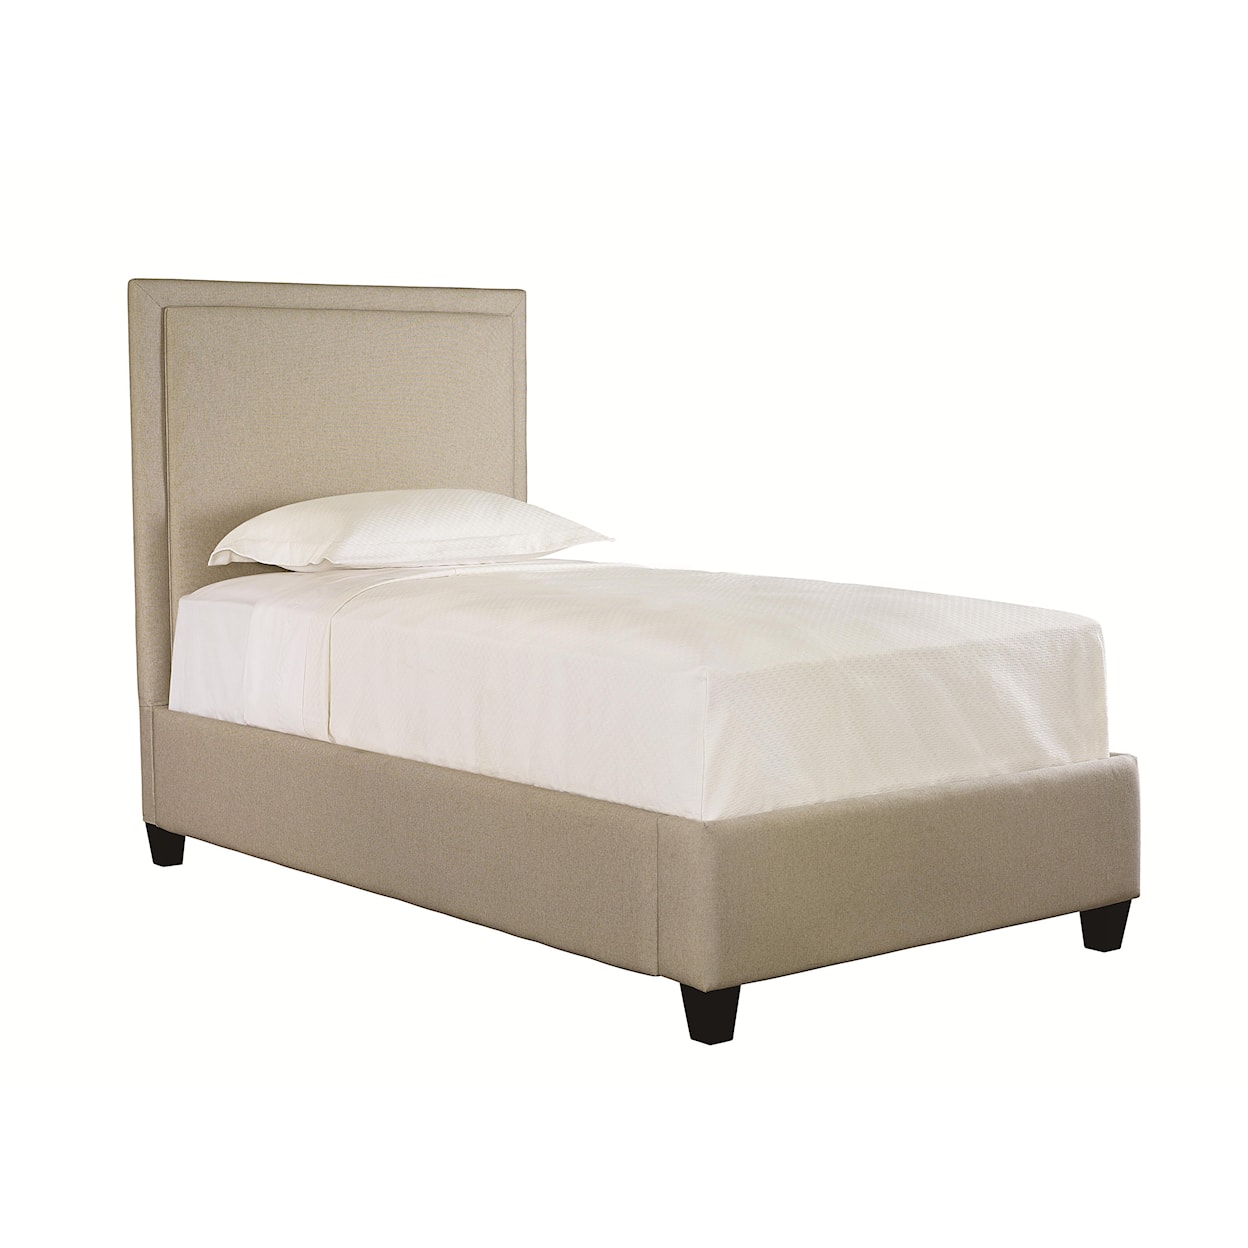 Bassett Custom Upholstered Beds Twin Manhattan Upholstered Bed with Low FB